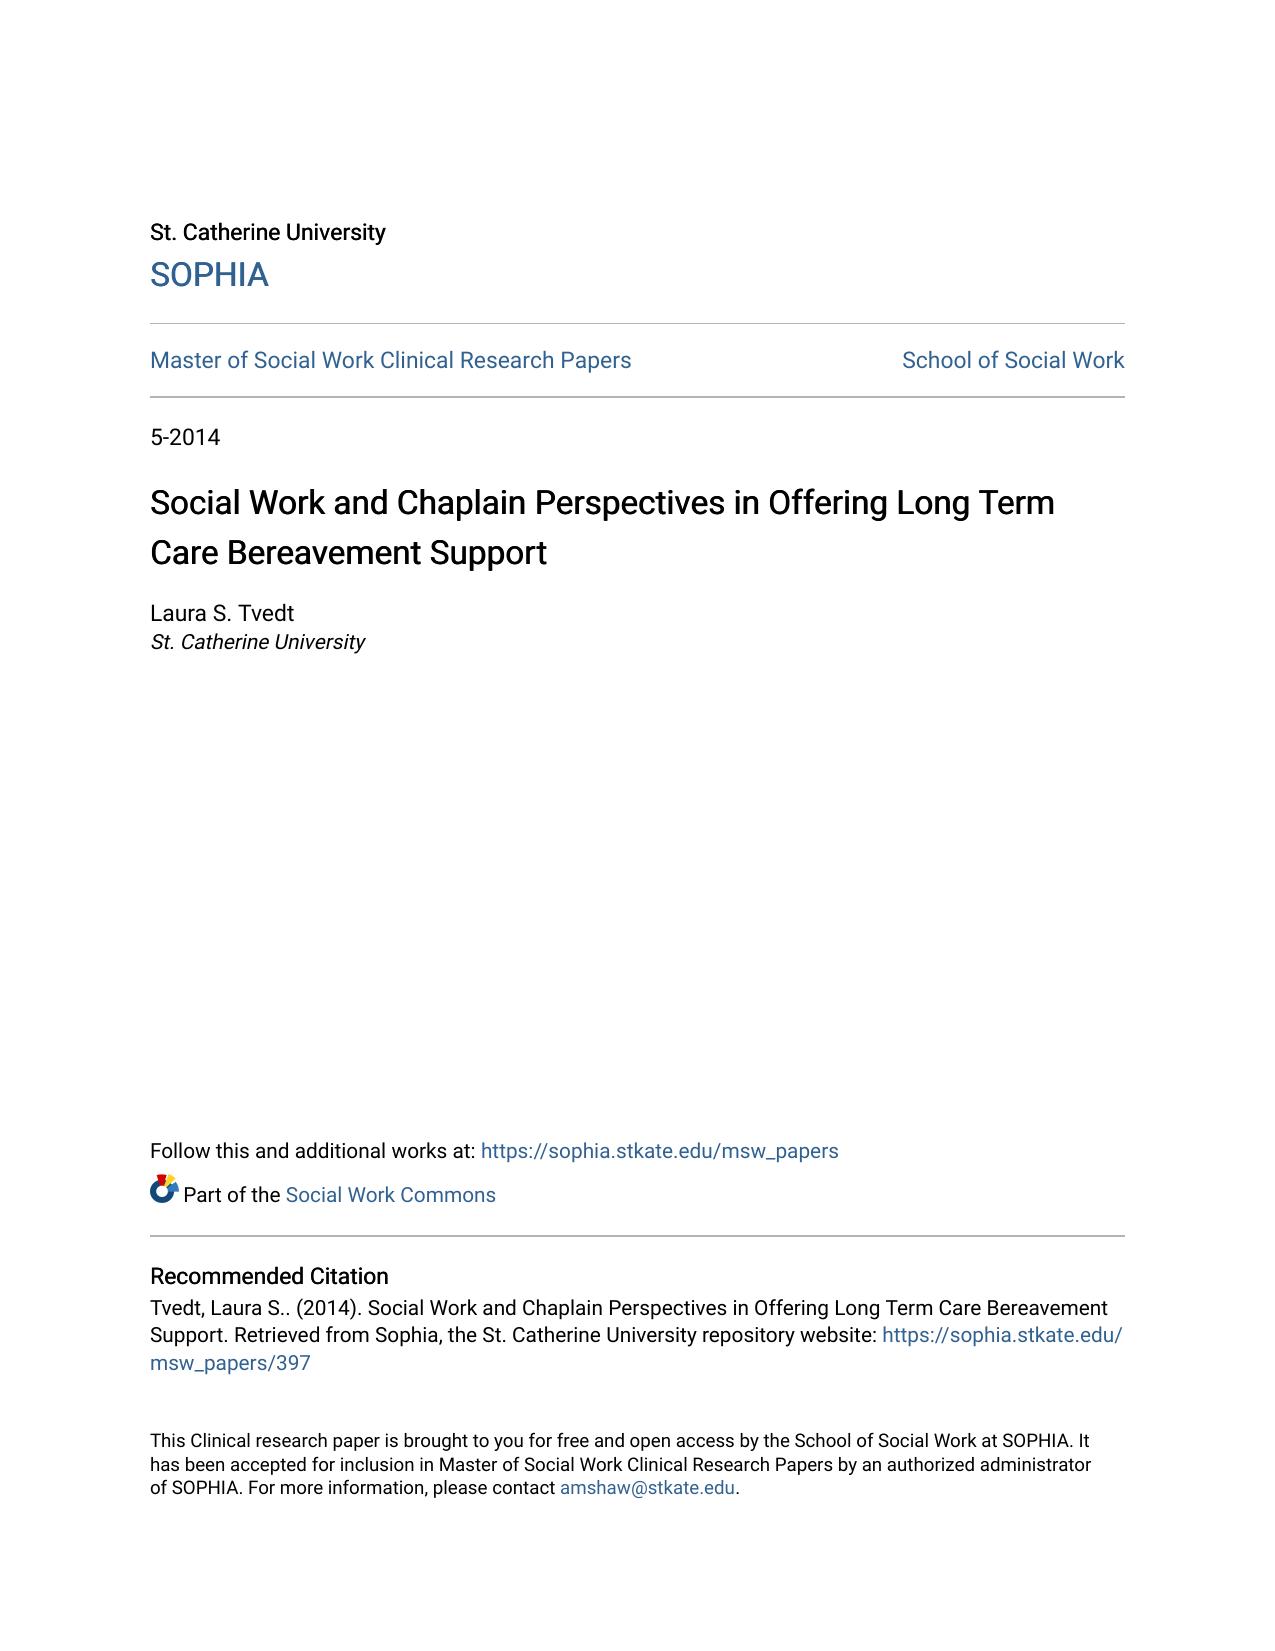 Social Work and Chaplain Perspectives in Offering Long Term Care Bereavement Support